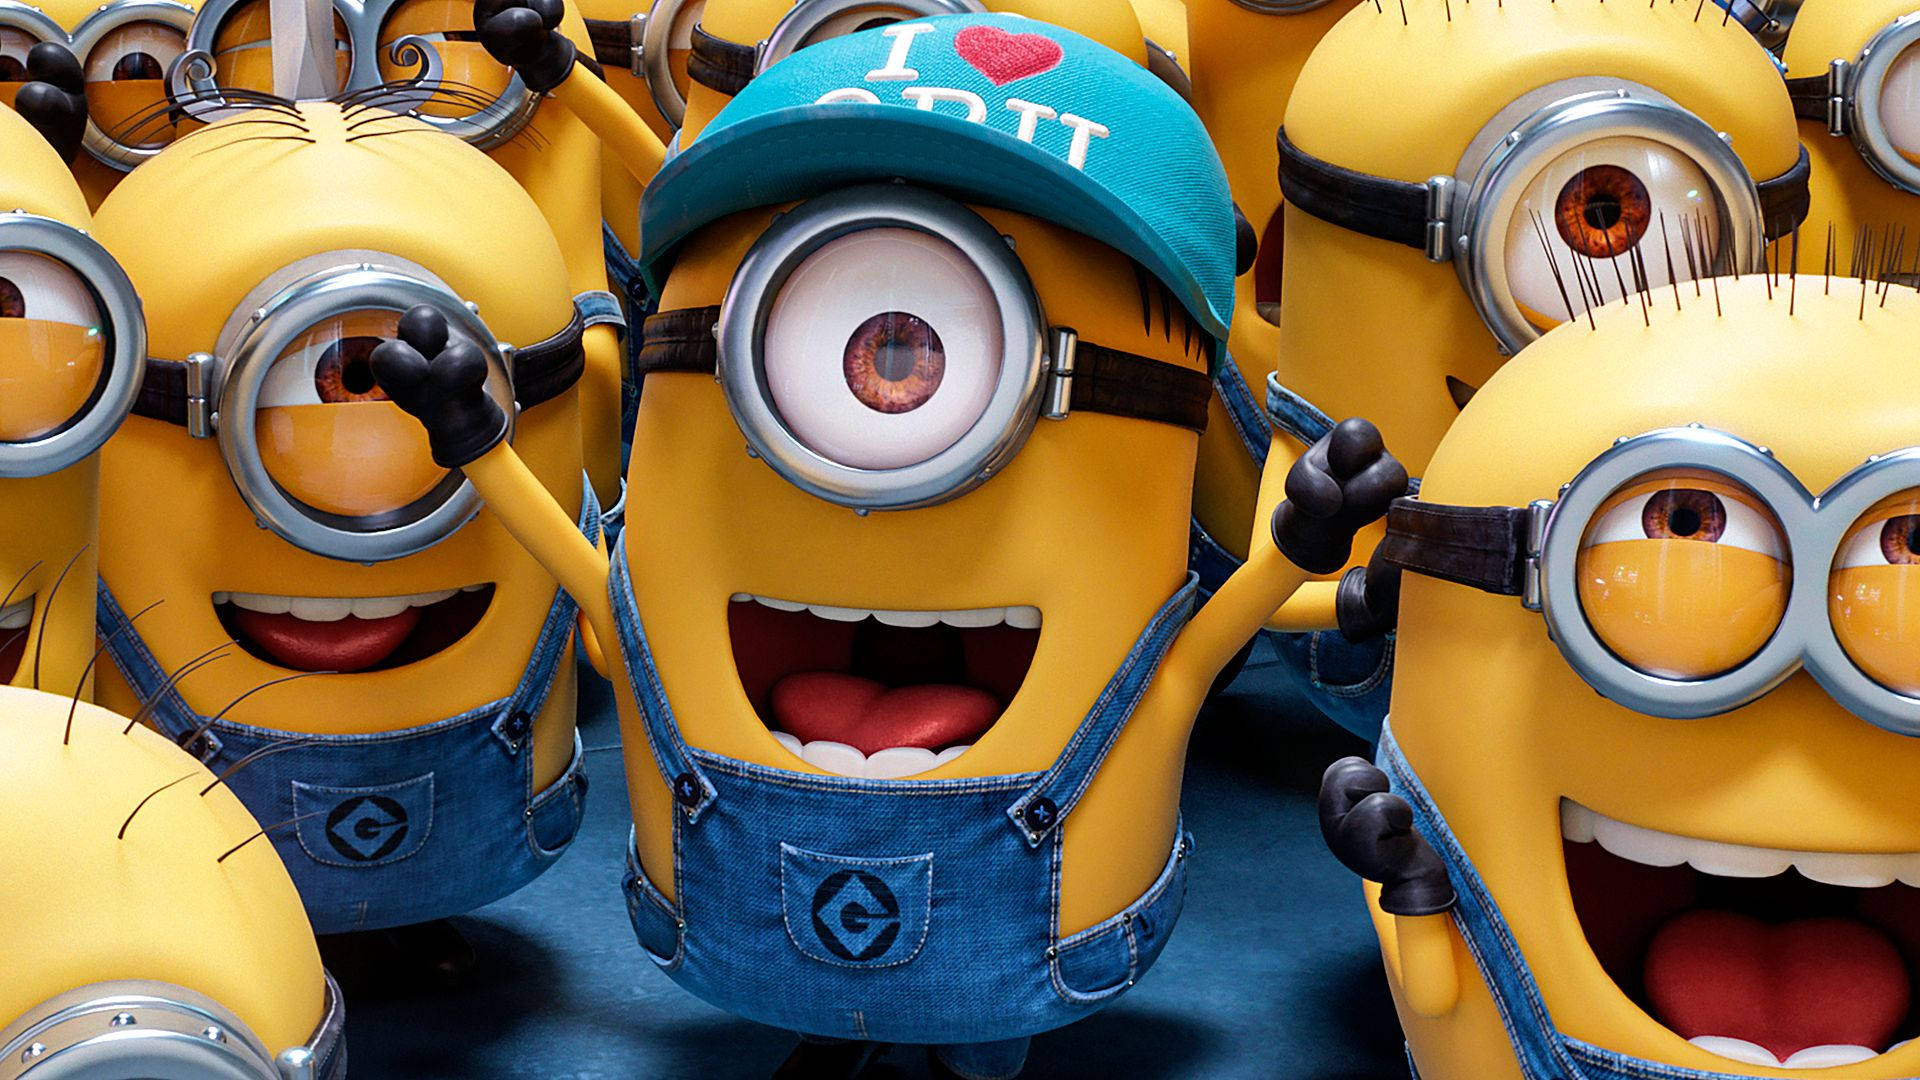 Despicable Me 3 Minions Smiling Widely Background